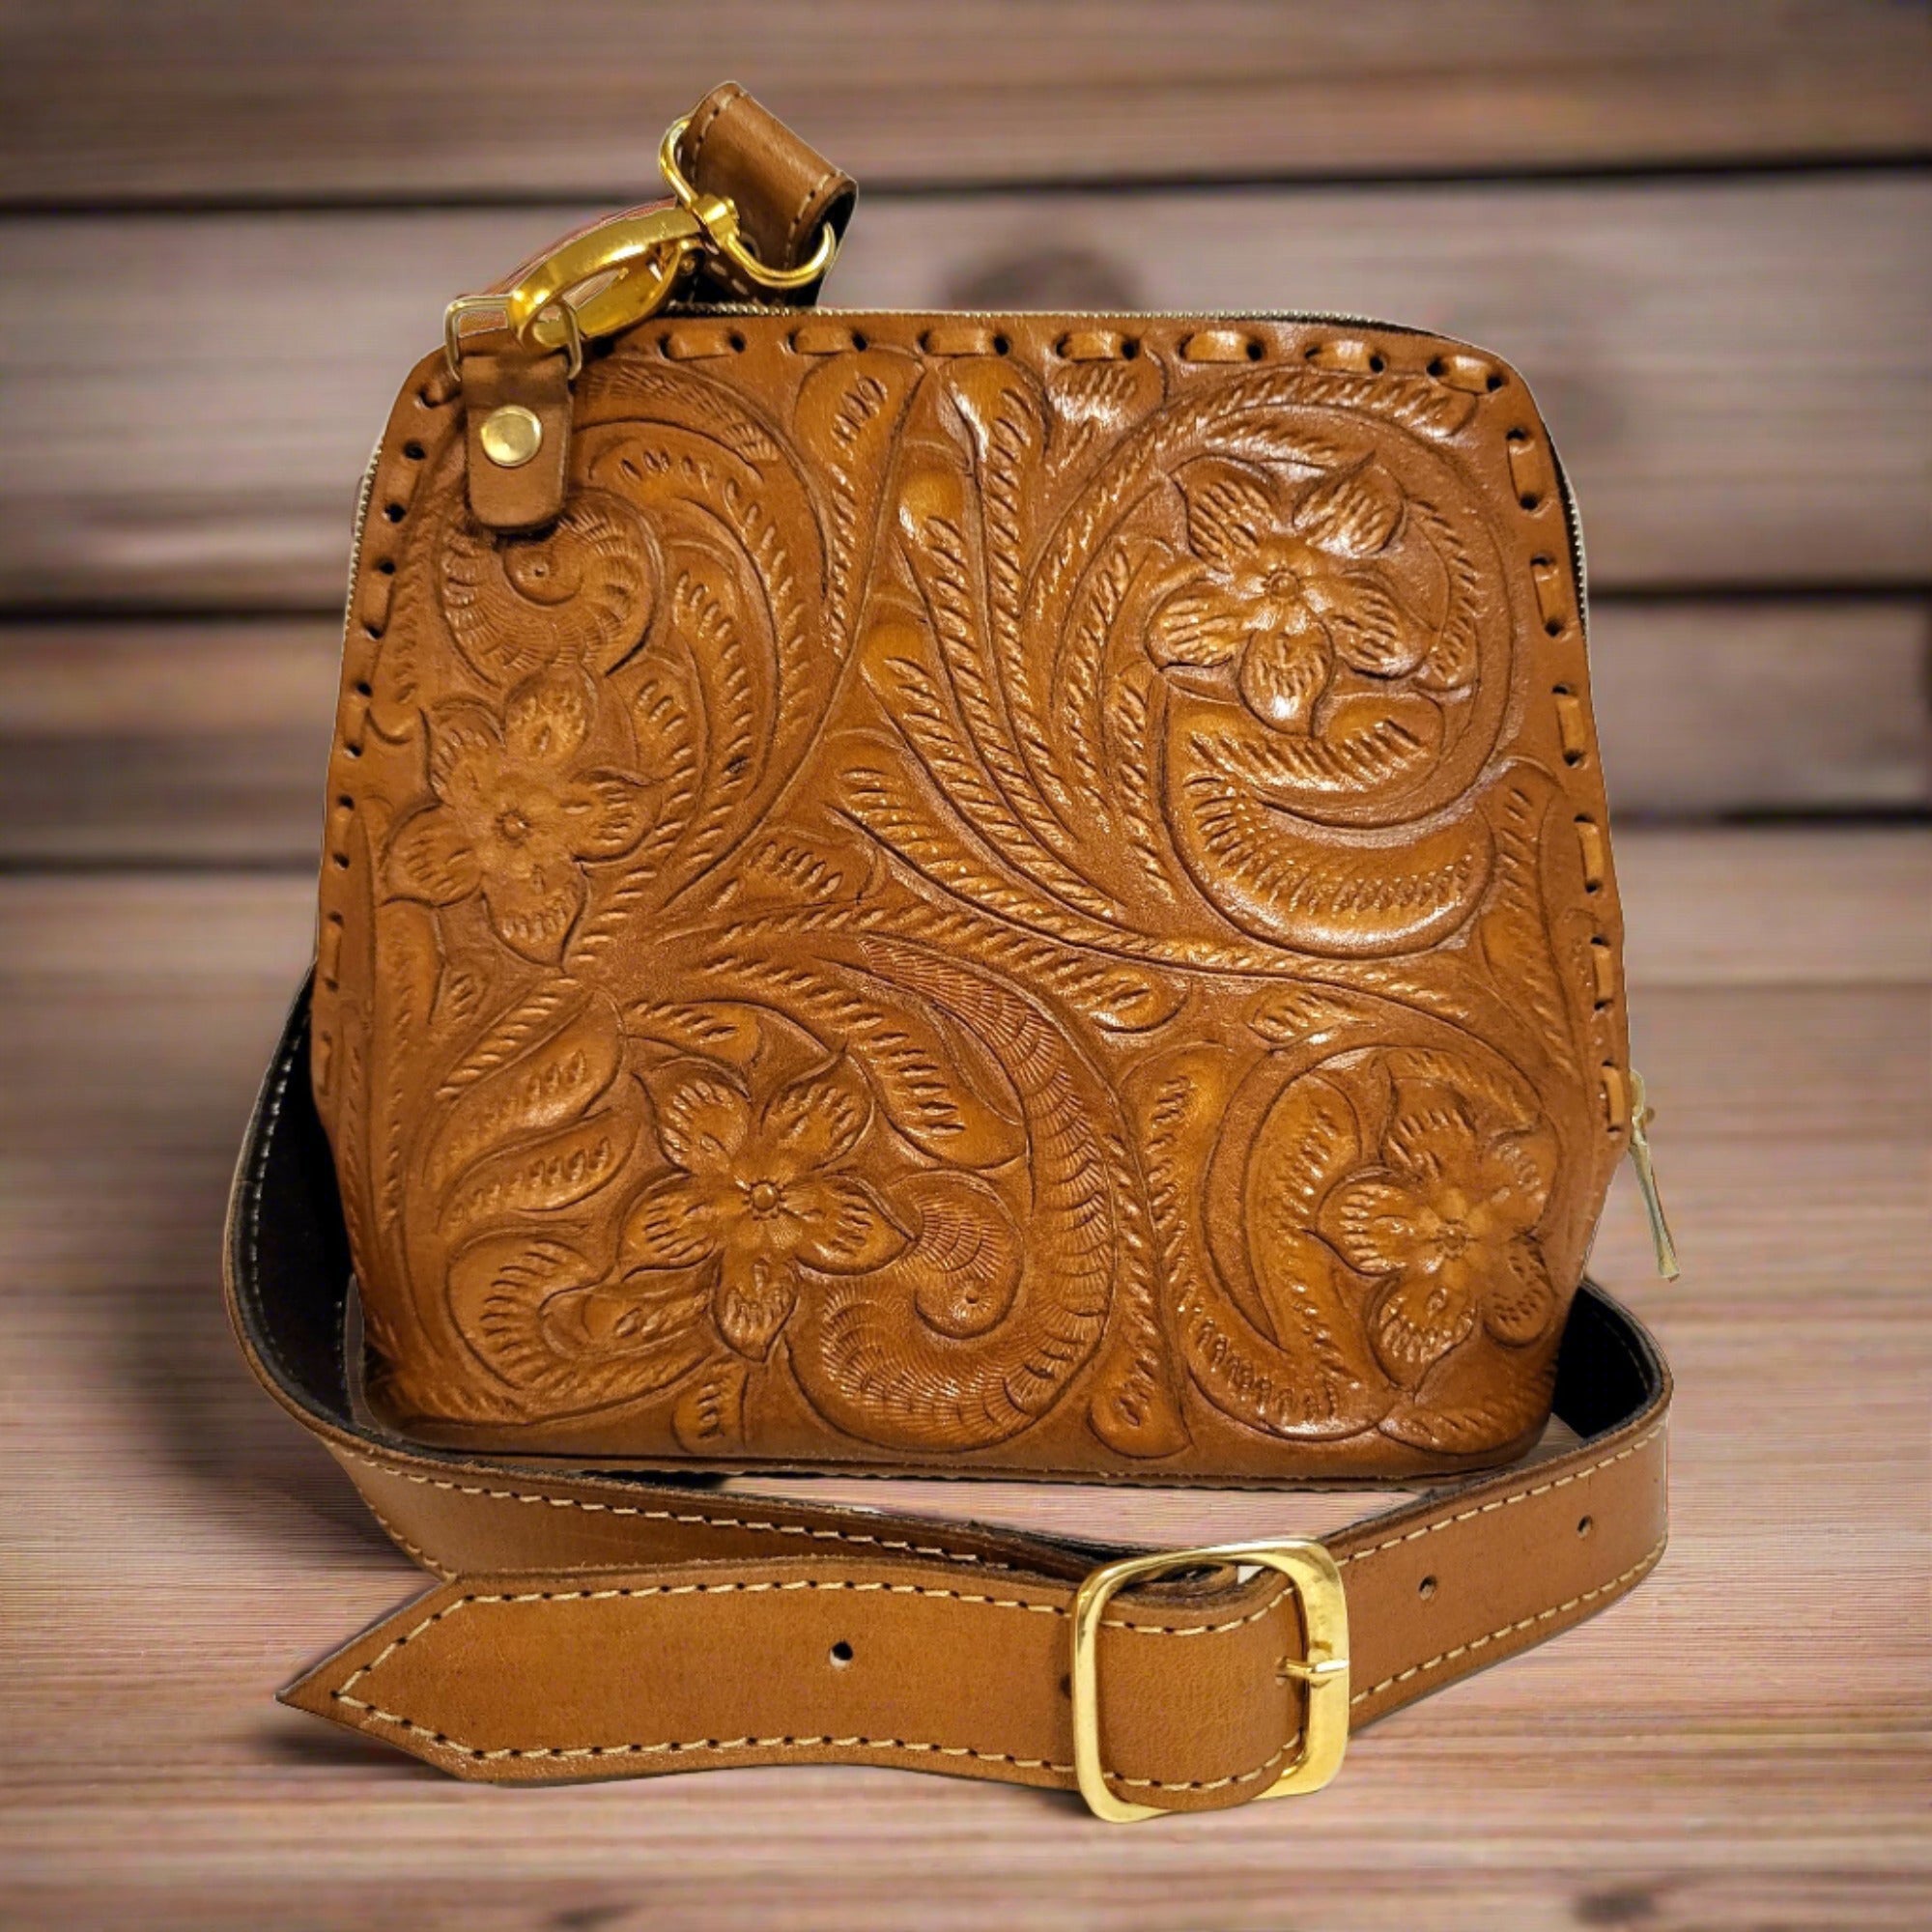 Hand-tooled leather bag for women, small bag, shoulder bag, brown leather bag with zipper